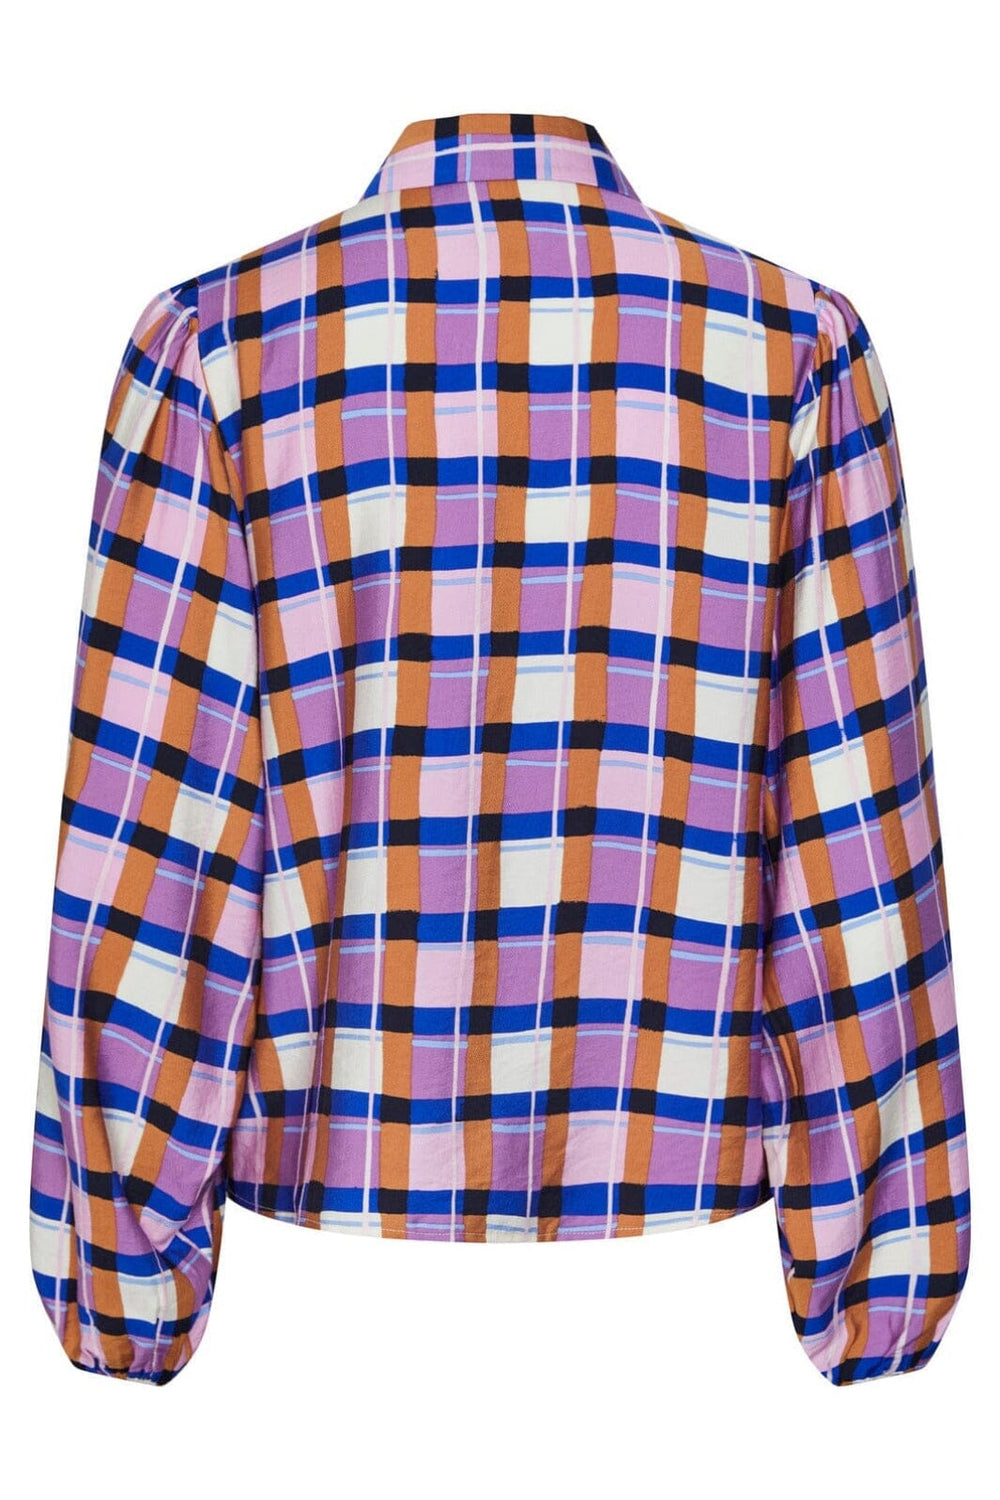 Y.A.S - Yassquare Ls Shirt - 4436451 Mulberry Square Aop Skjorter 